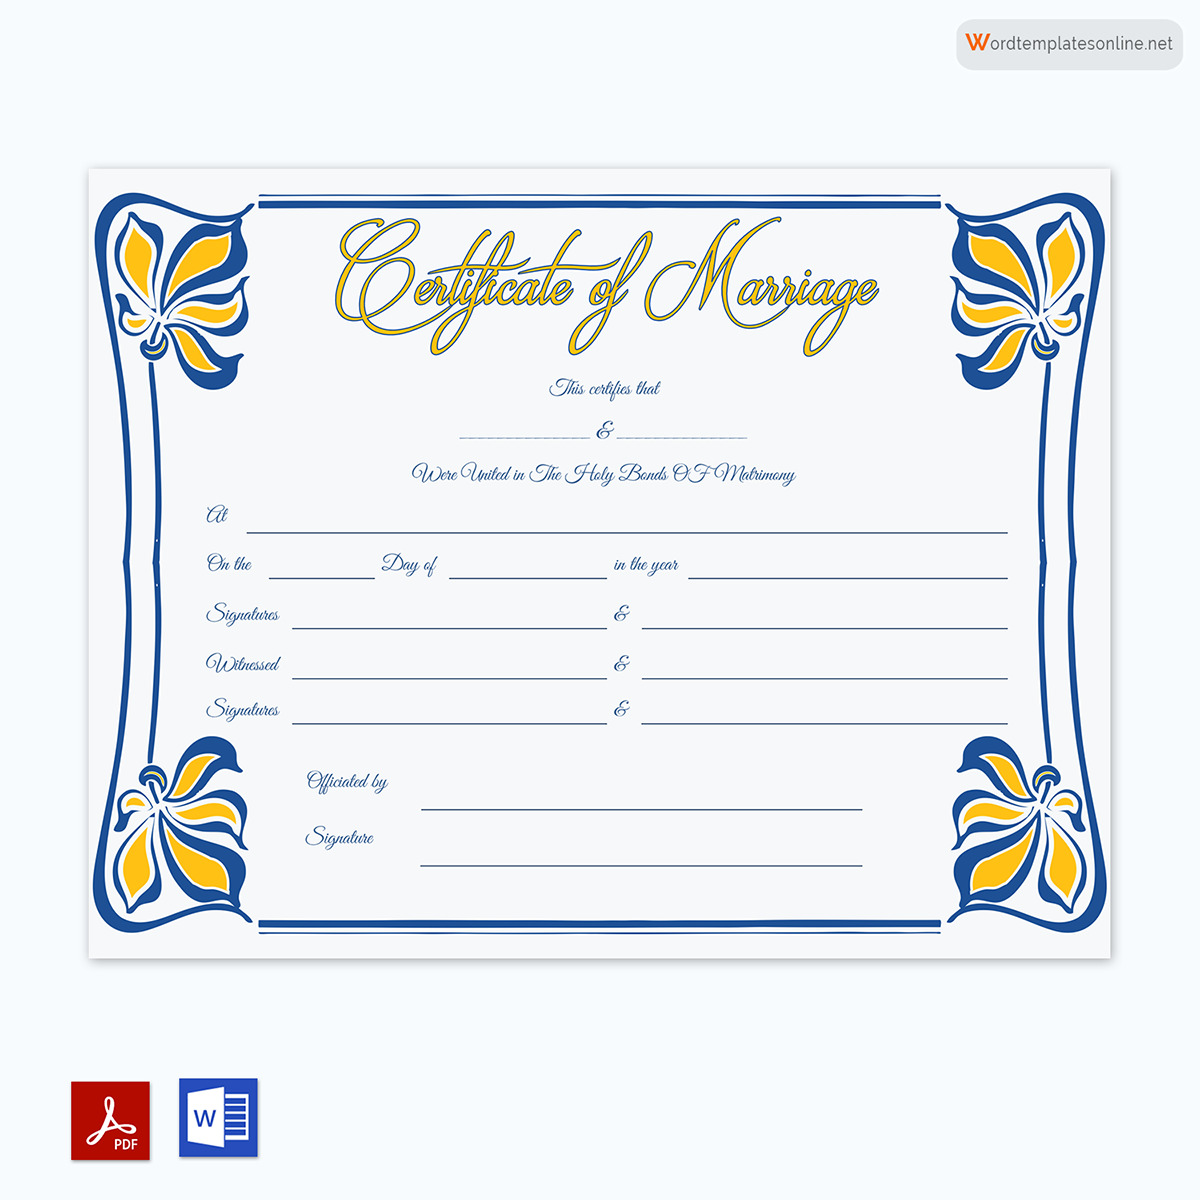 Marriage Certificate Template word